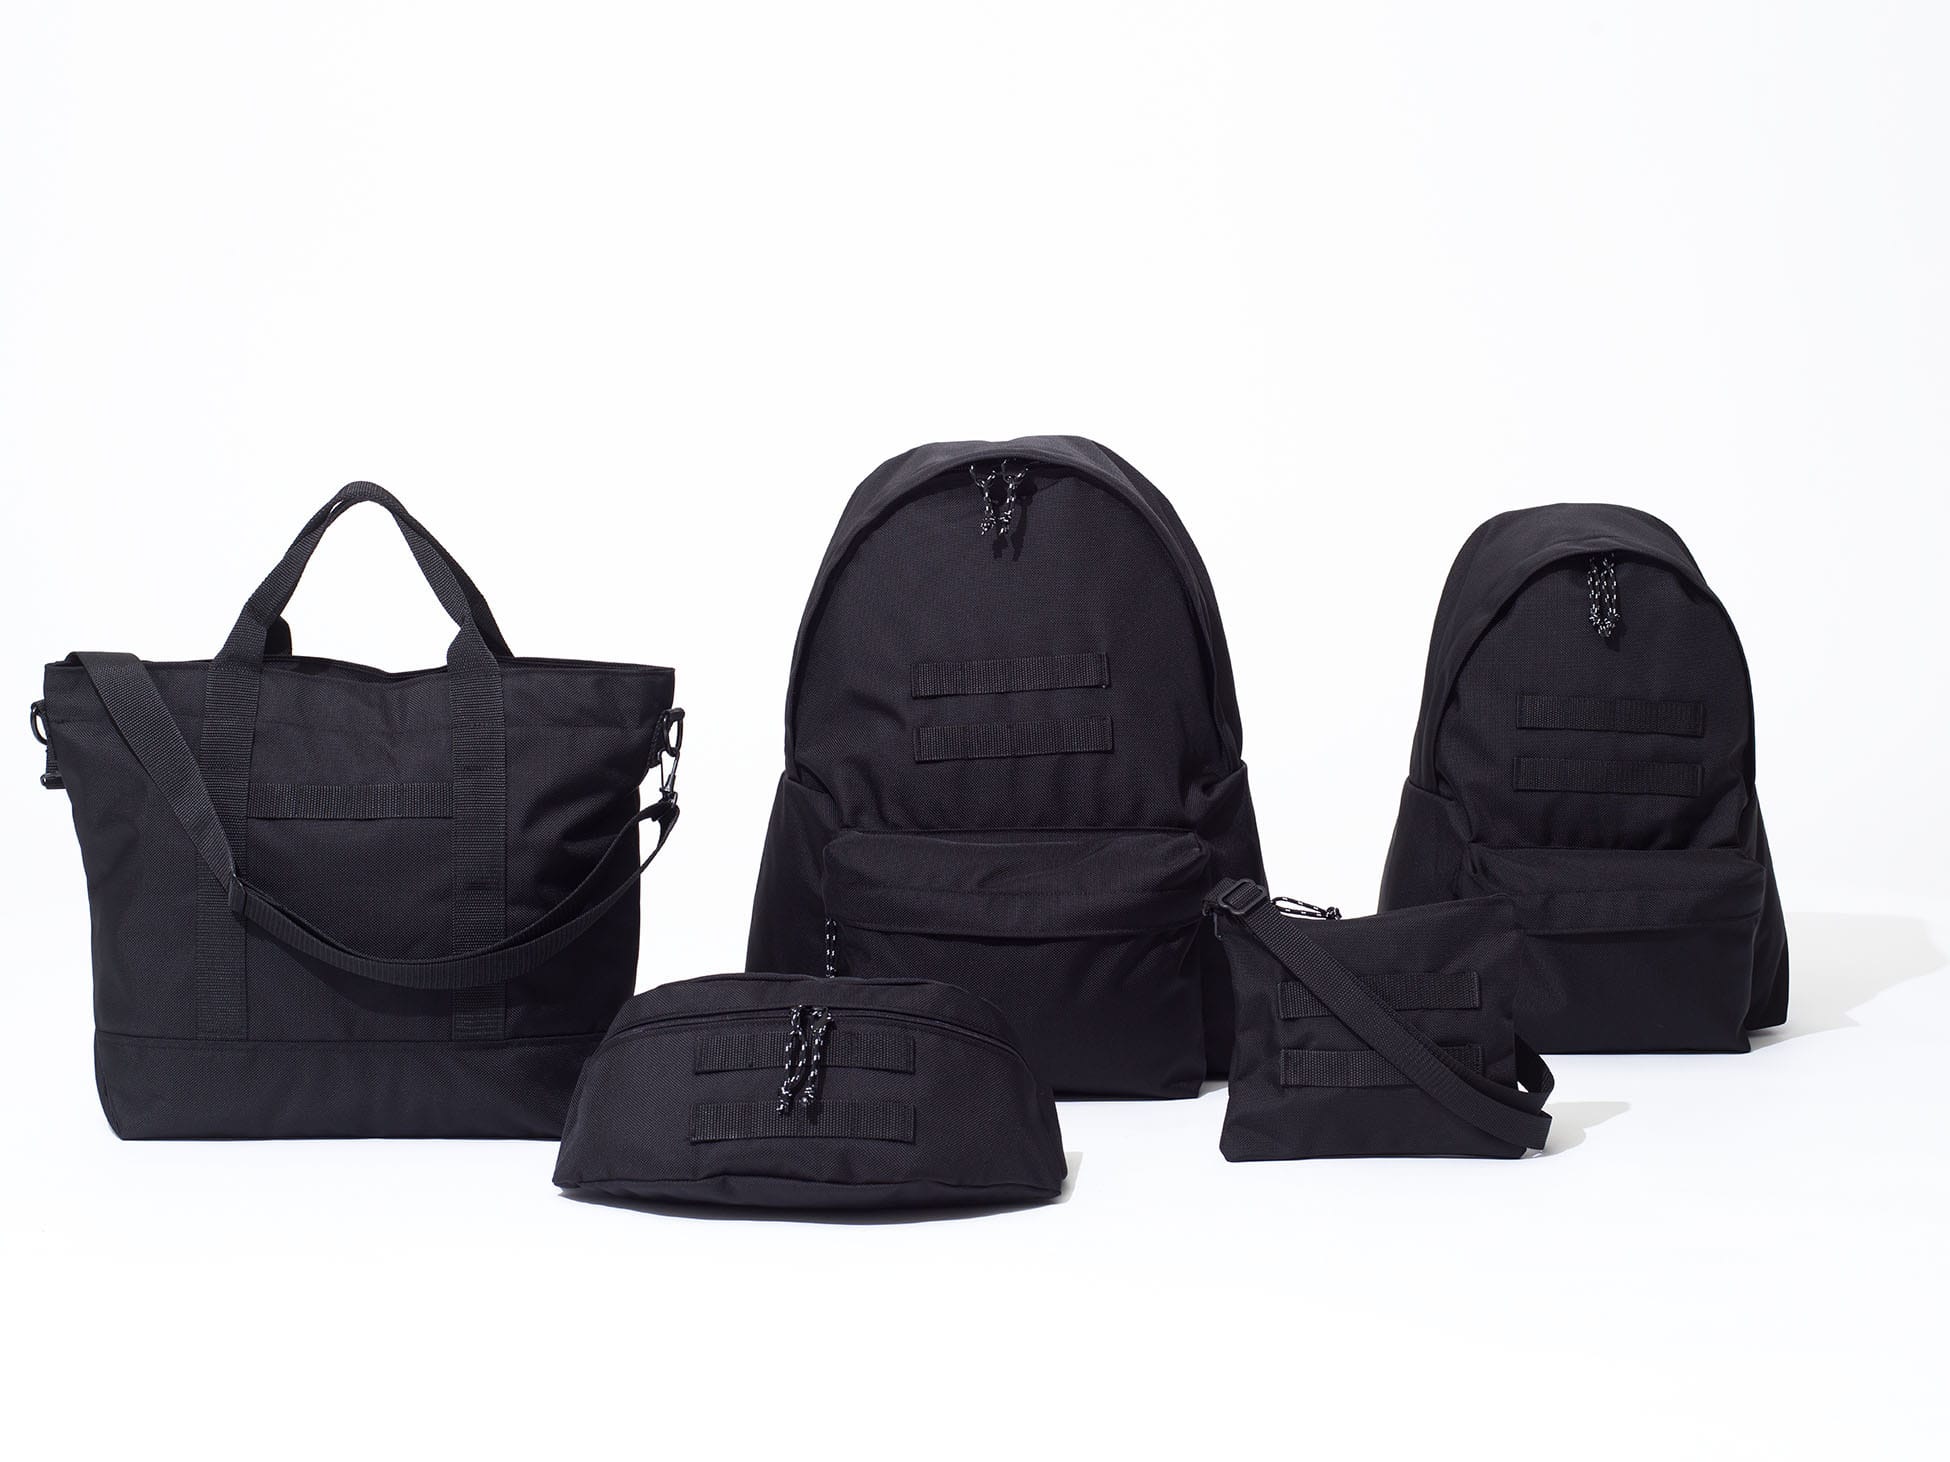 JIM MELVILLE for Ron Herman Bag Collection 8.11(Fri) New Arrival